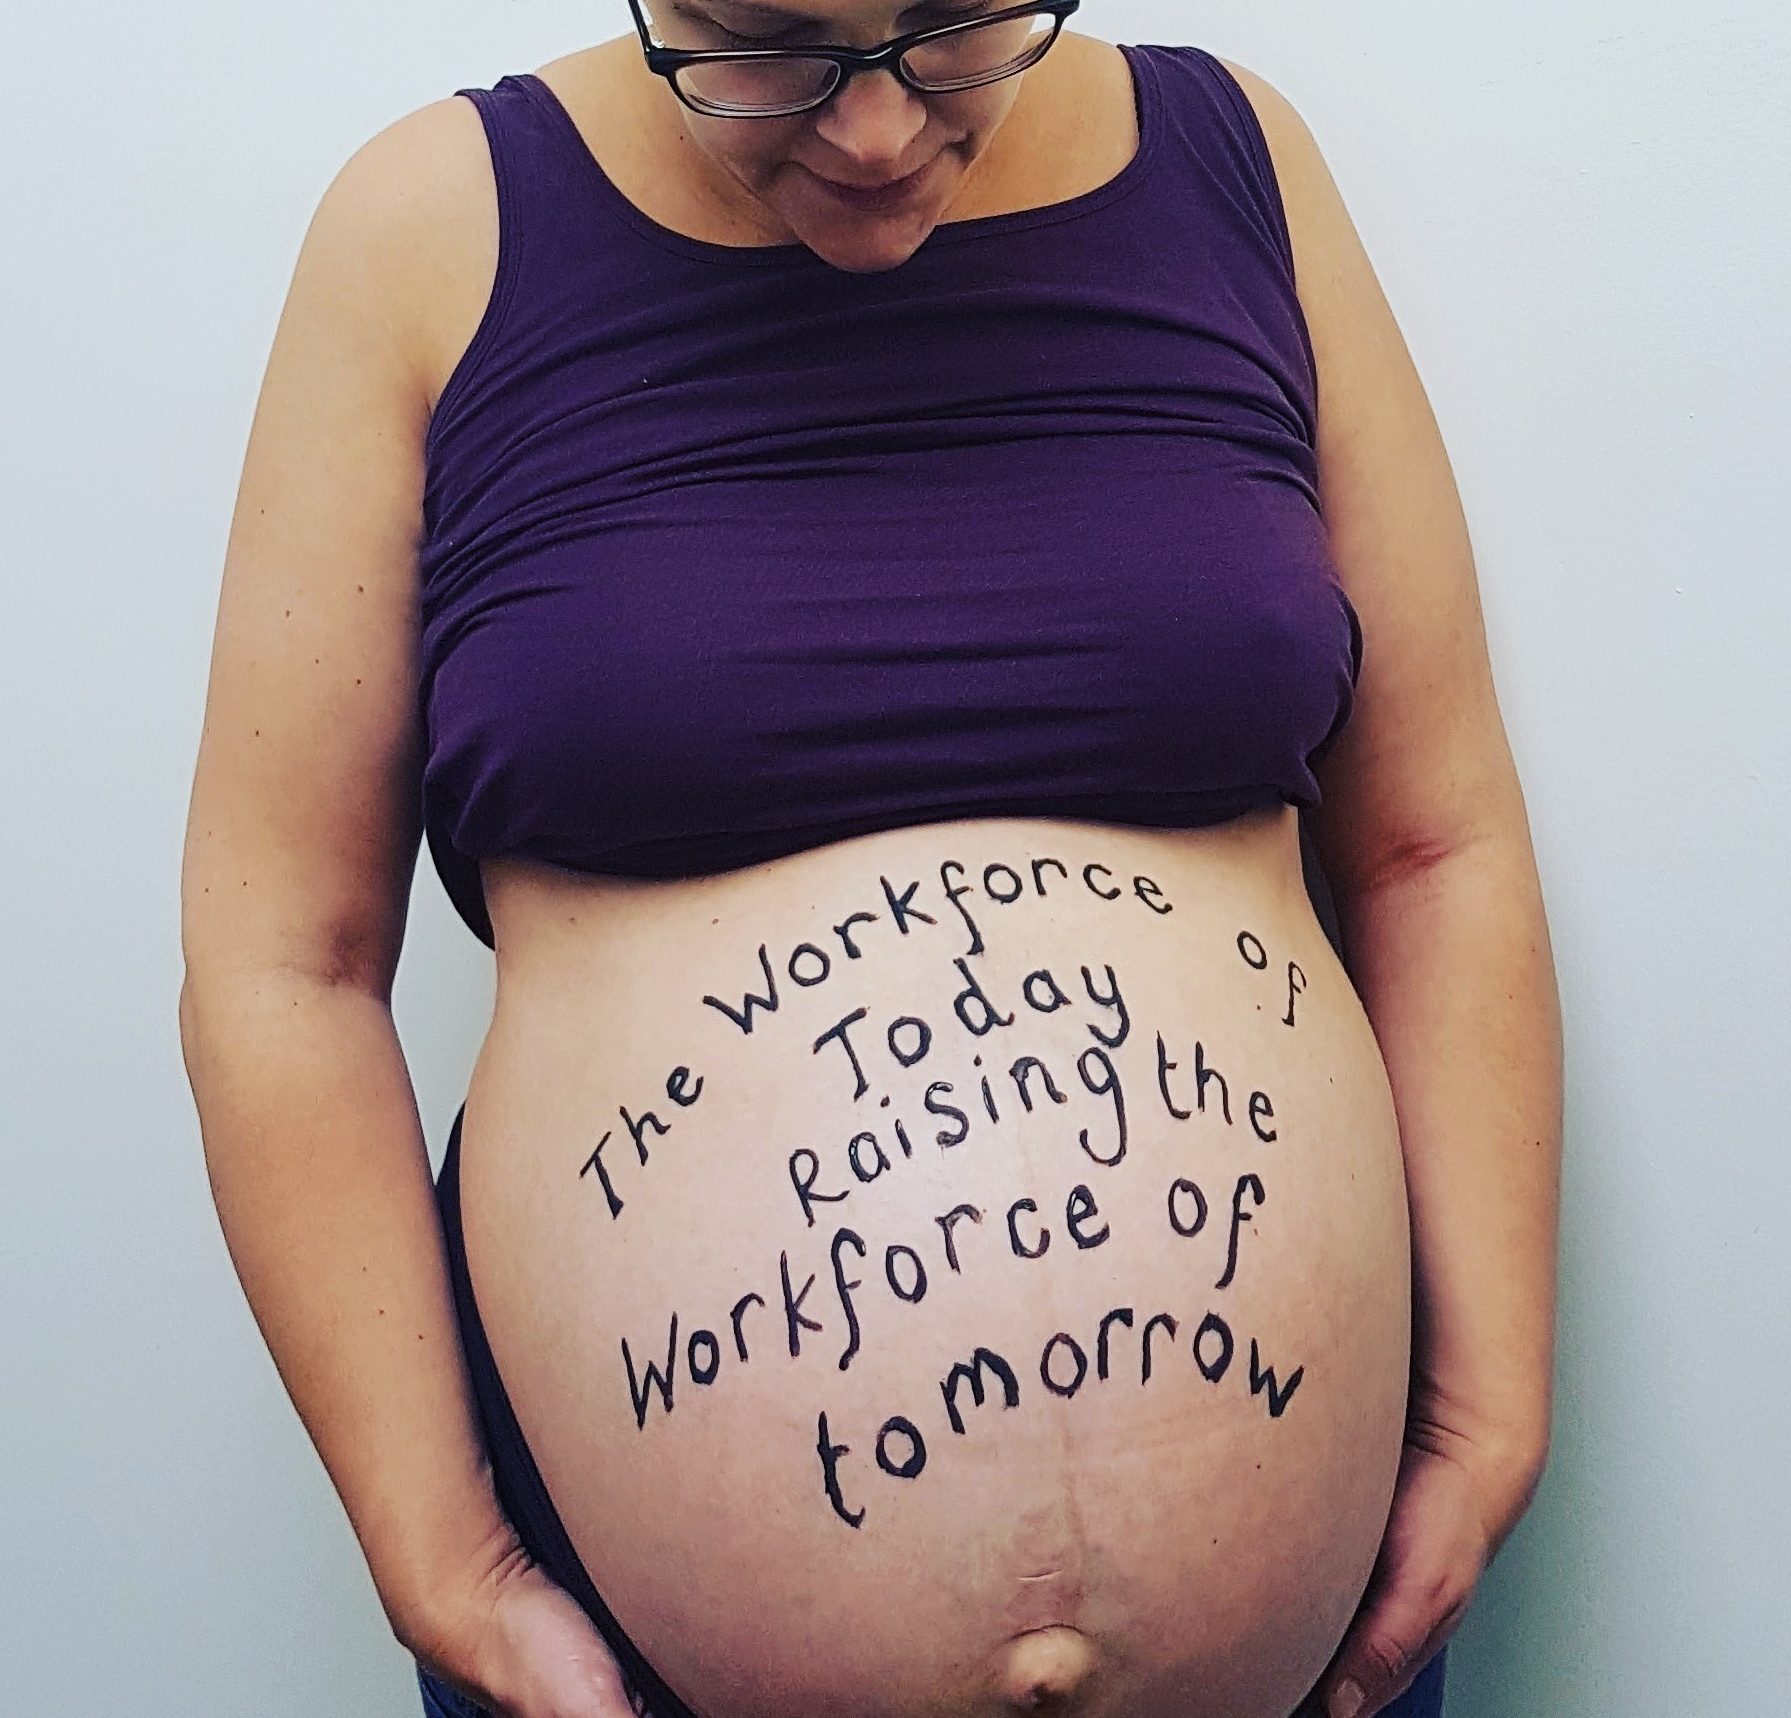 Pregnant woman with 'The workforce of today raising the workforce of tomorrow' written on her belly